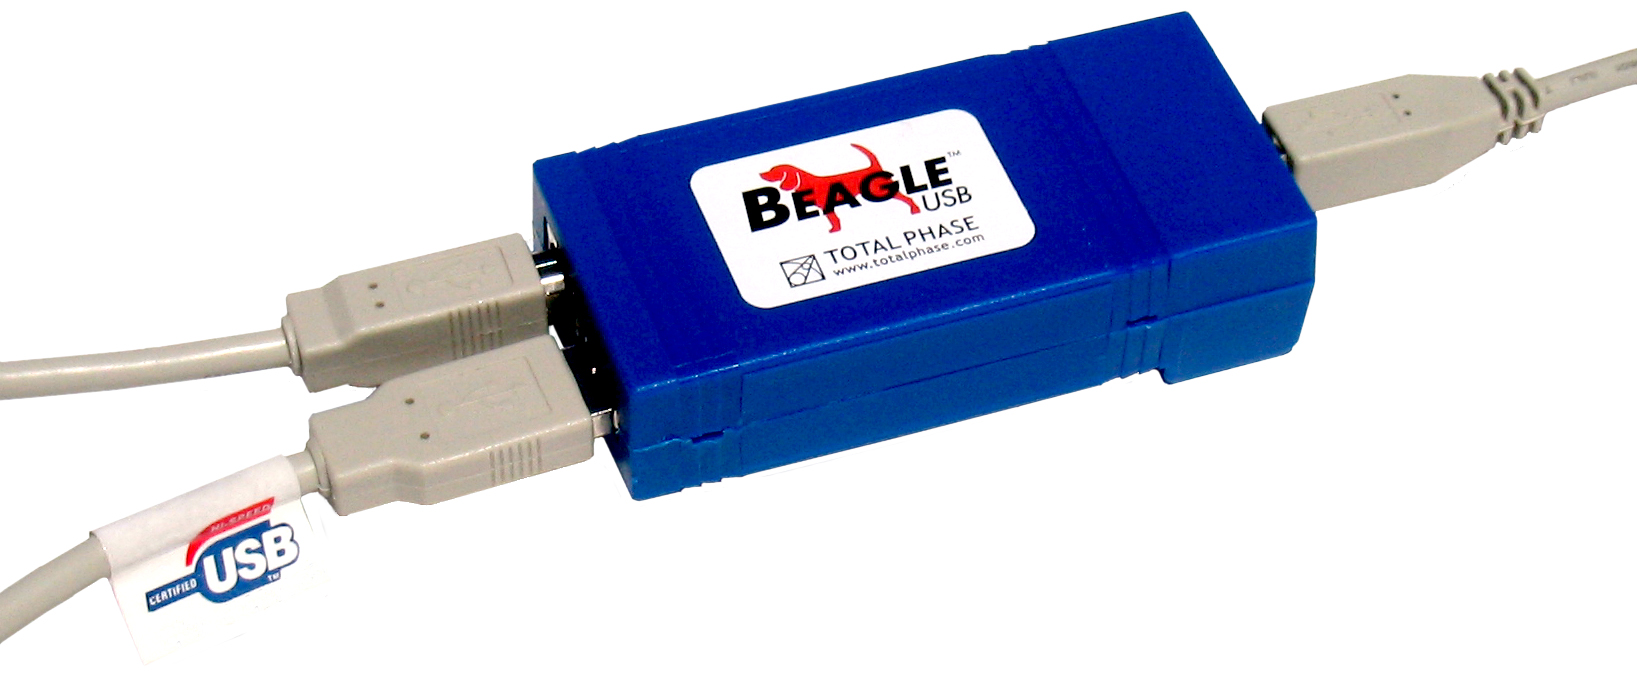 Phase Launches the Beagle USB Protocol Analyzer, Low-Cost USB Monitor for and Linux